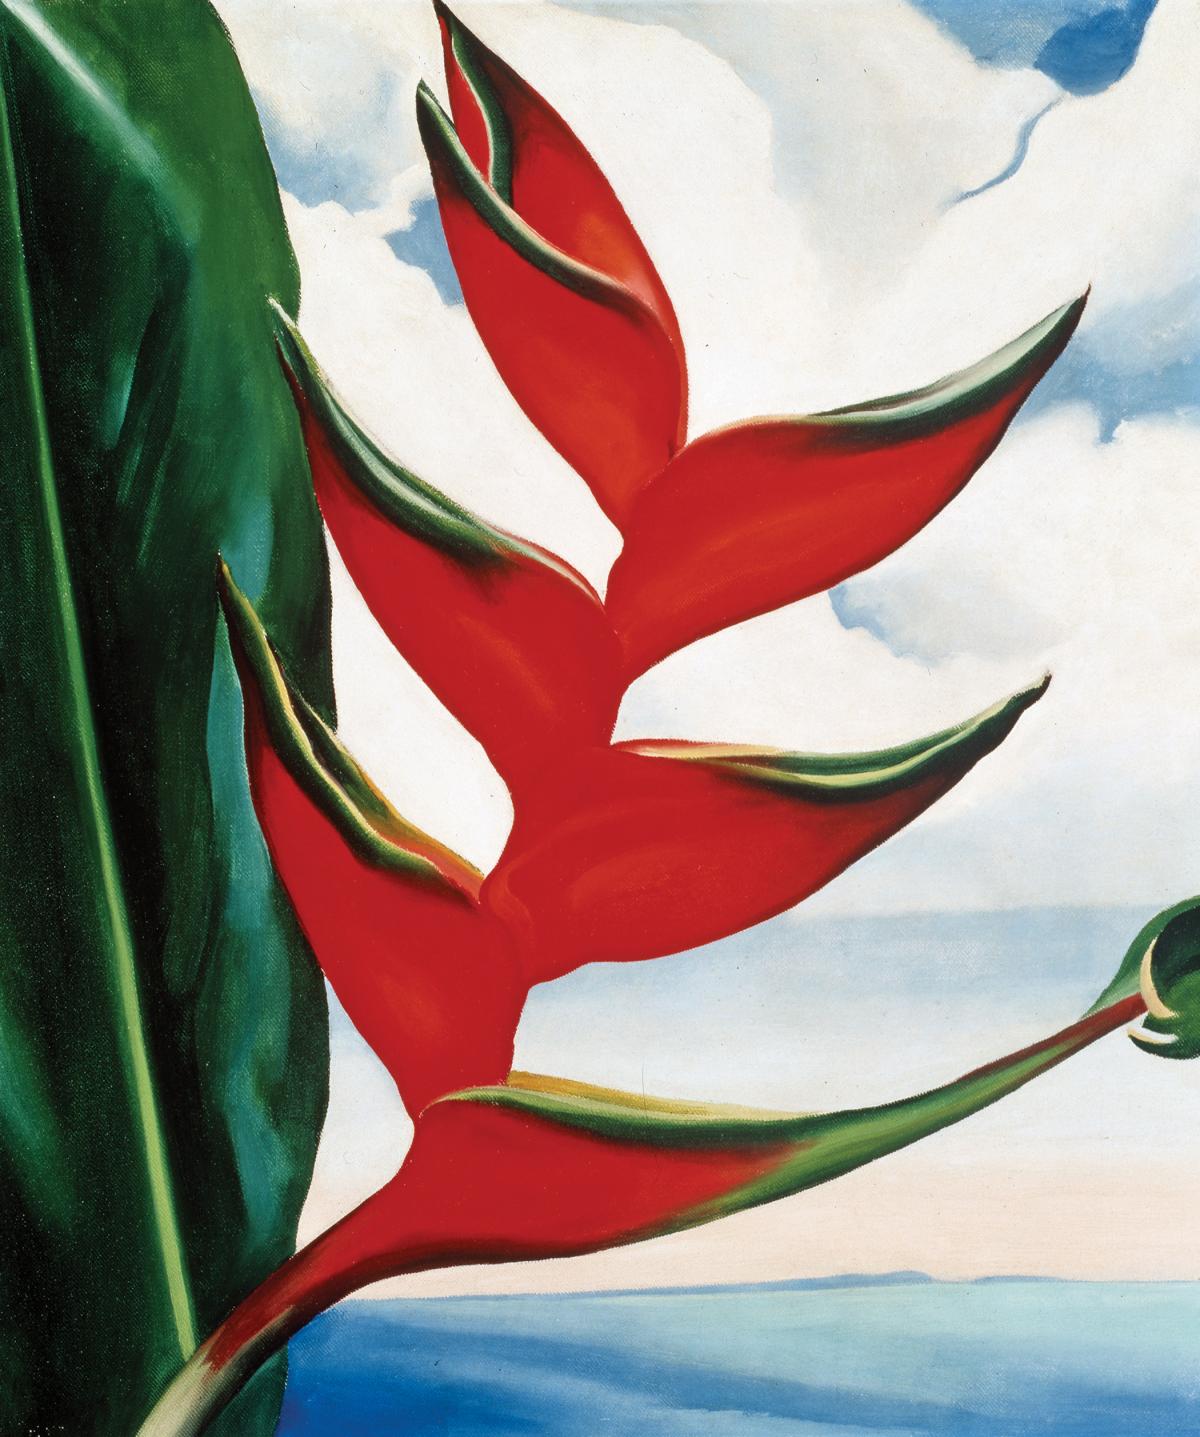 Heliconia, Crab’s Claw Ginger, 1939, by Georgia O'Keeffe